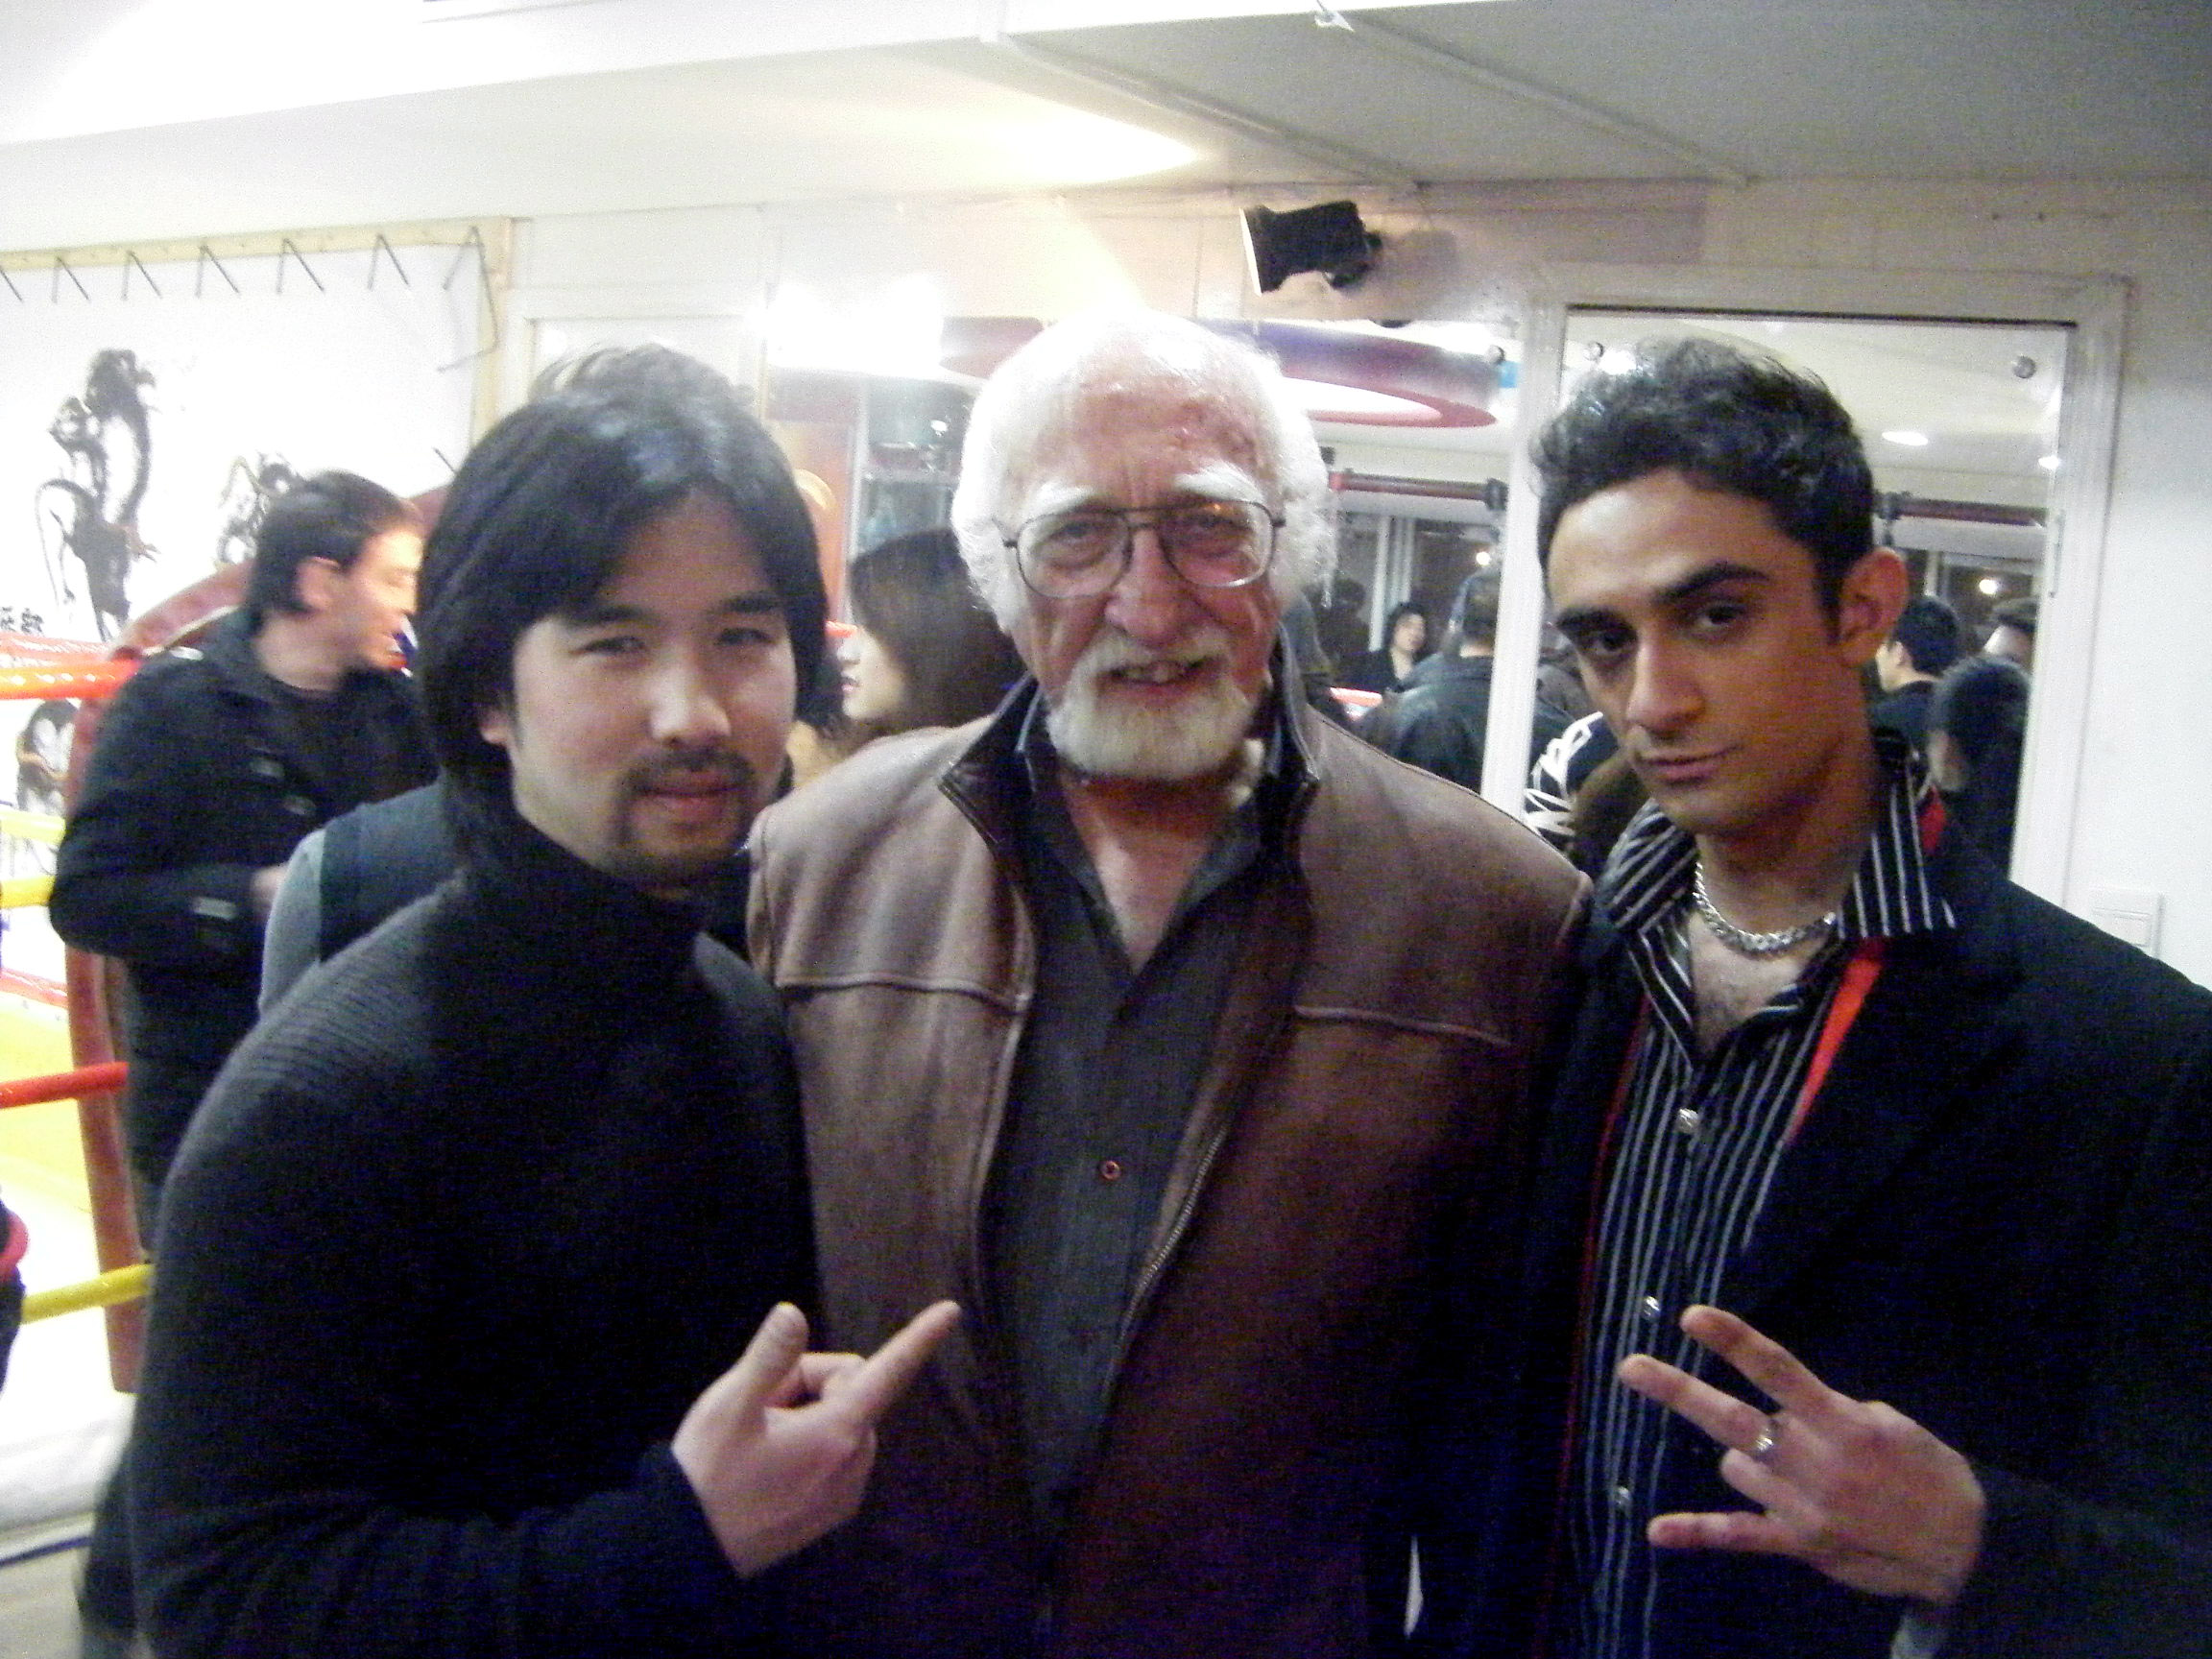 Christian Bachini, Director Richard Chung and Actor Jon T. Ben from Bruce Lee's 